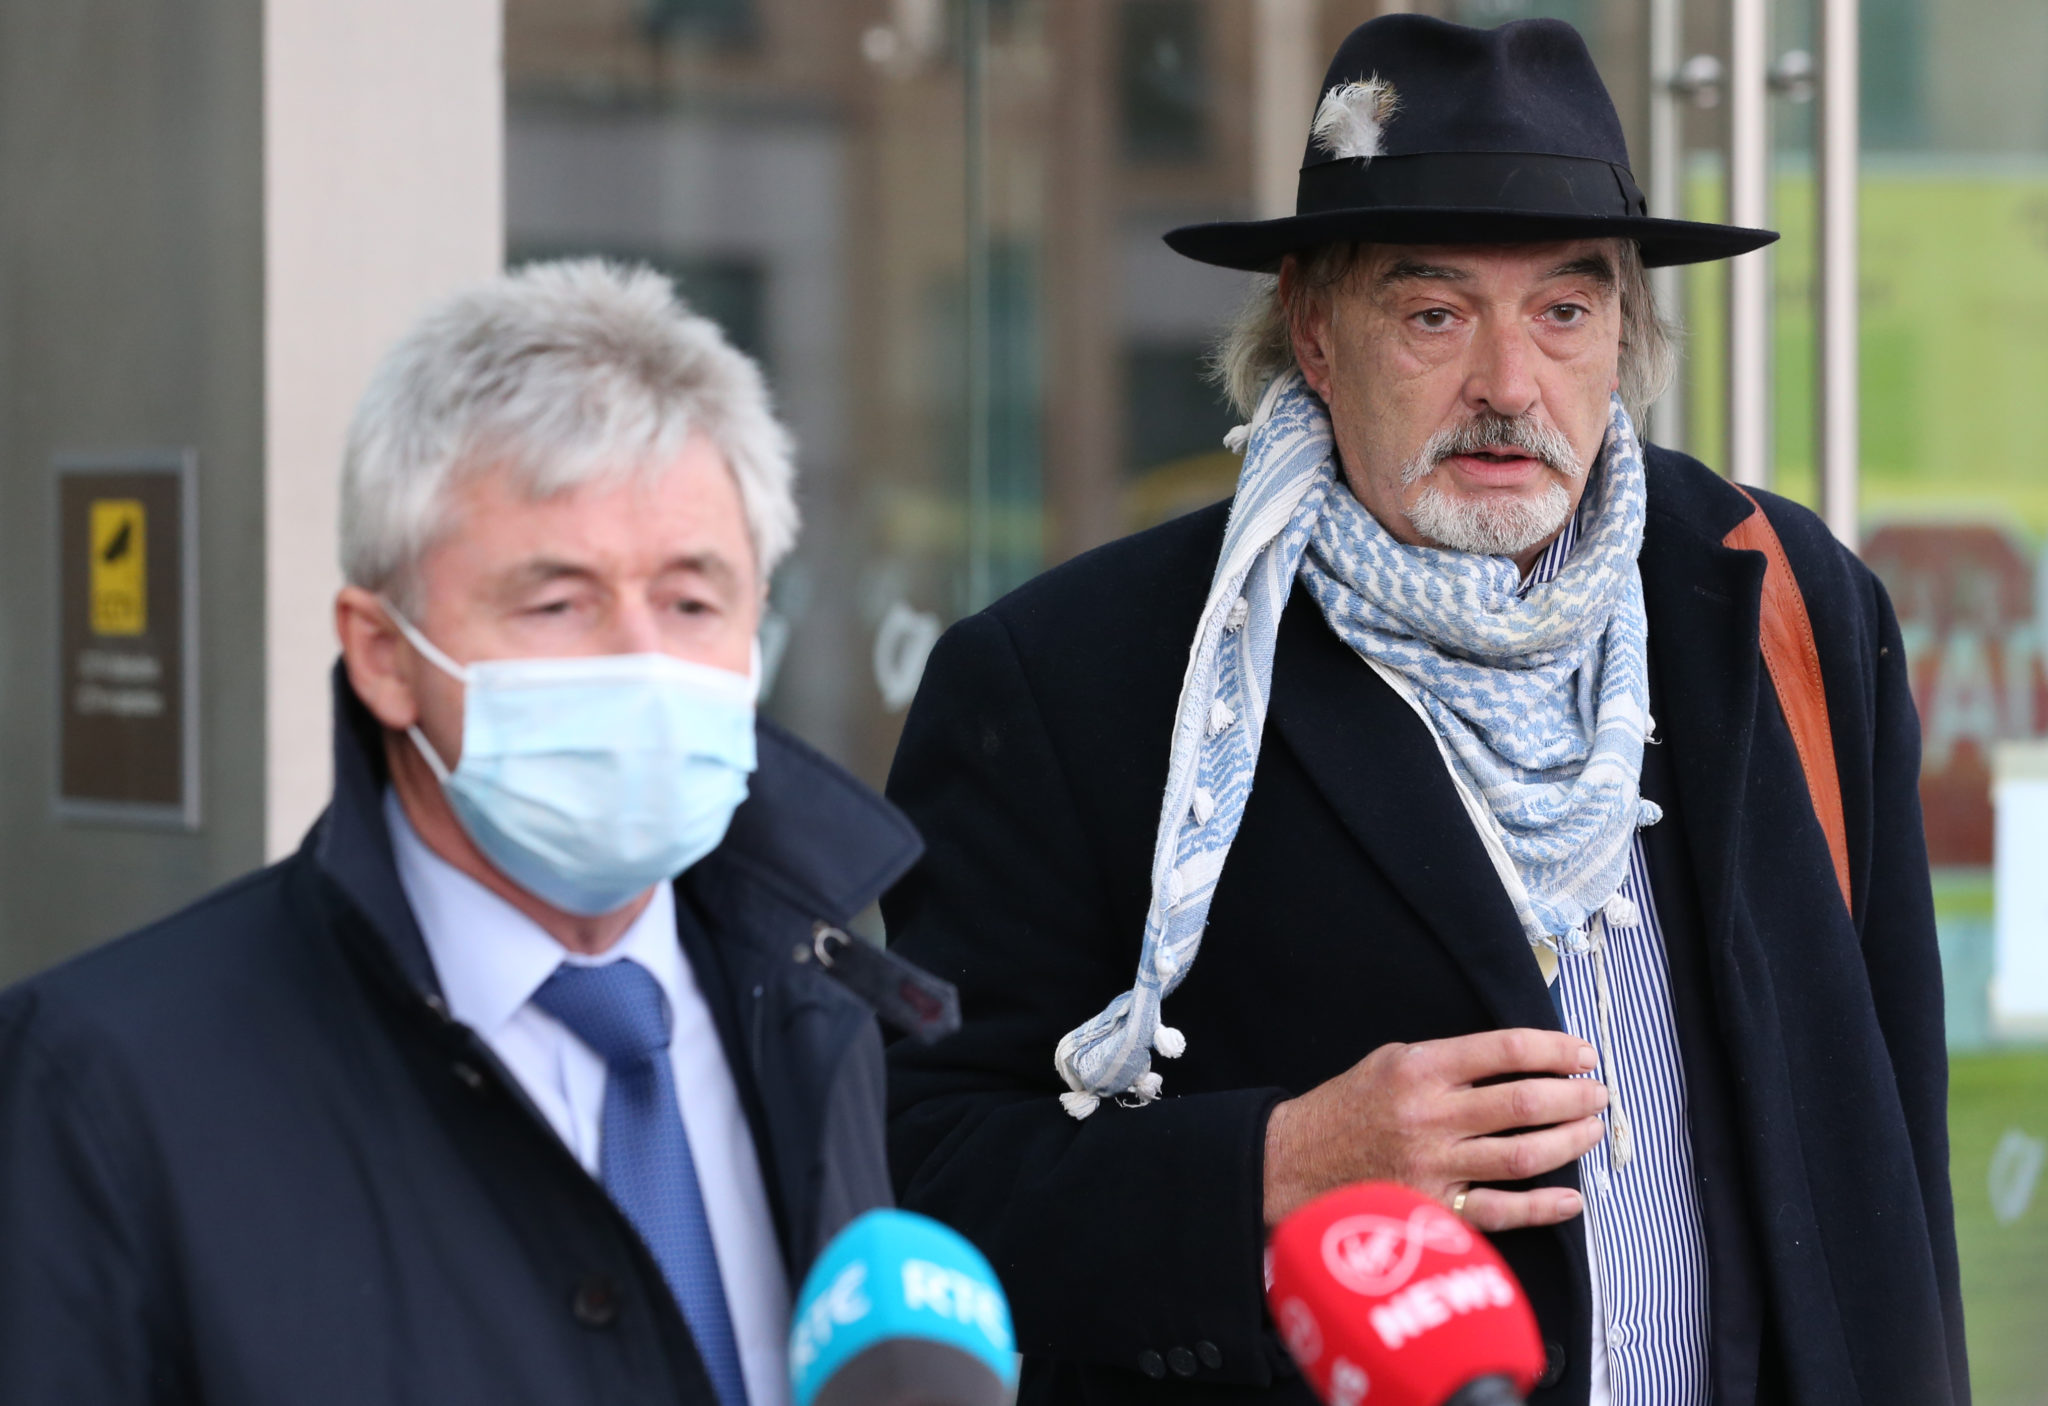 Ian Bailey (right) with his solicitor Frank Buttimer leaving the Central Criminal Court in Dublin in October 2020. Picture by: RollingNews.ie